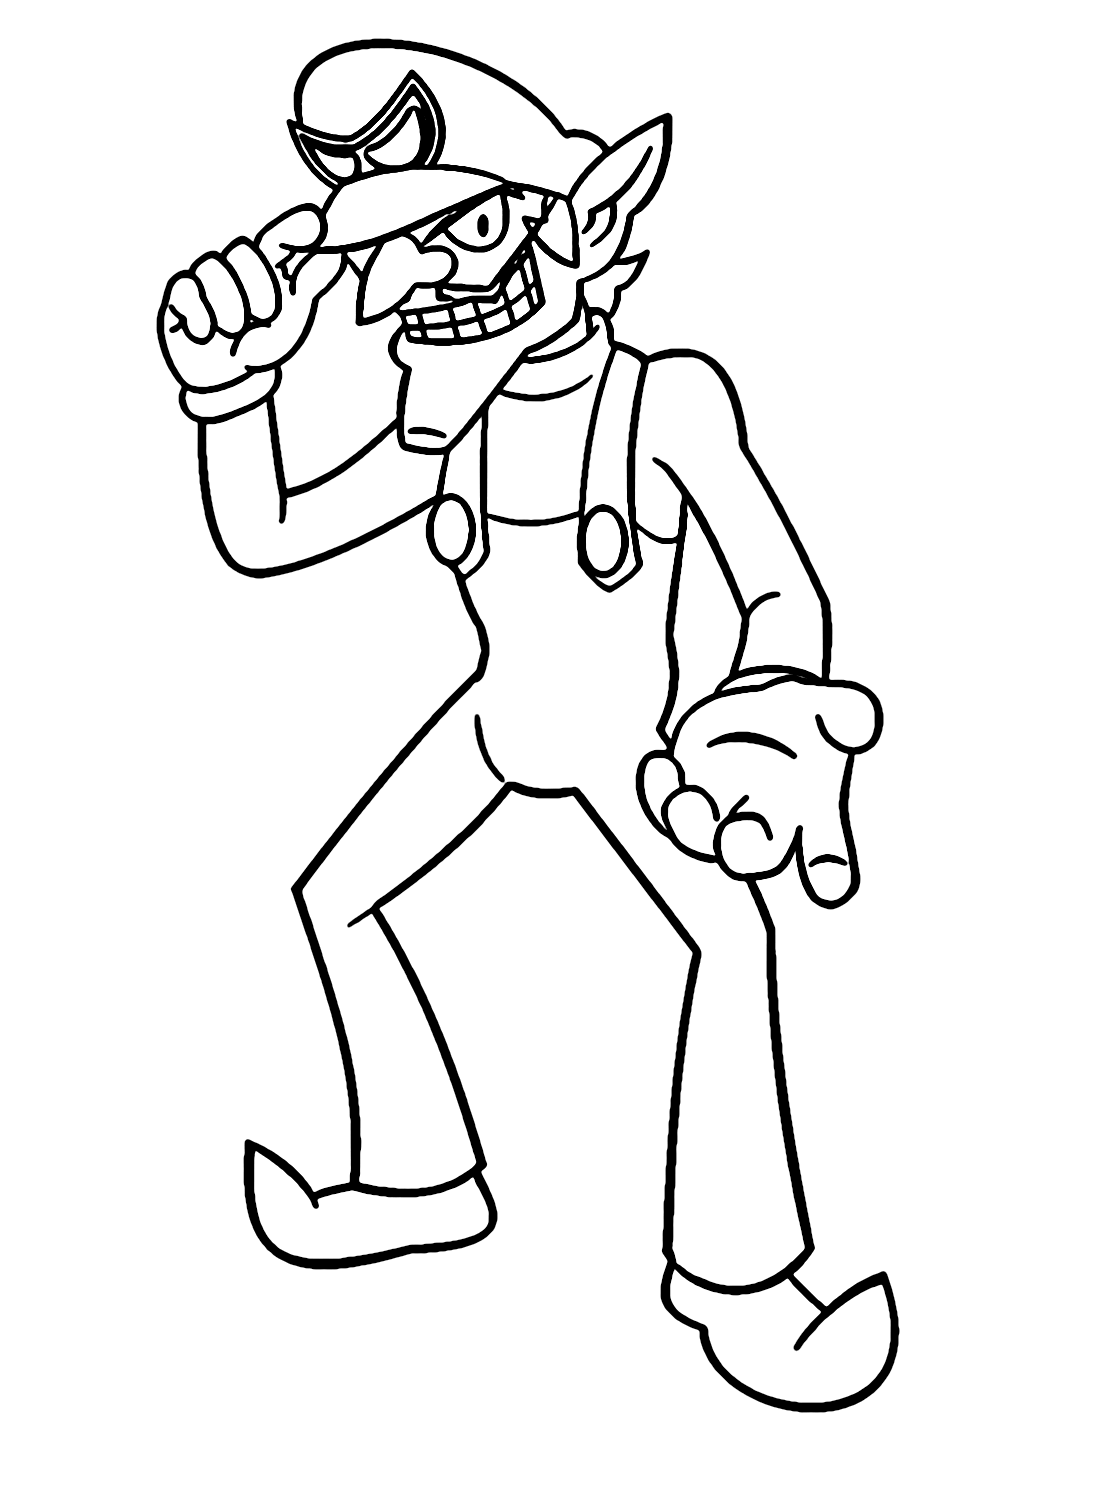 waluigi and wario coloring pages